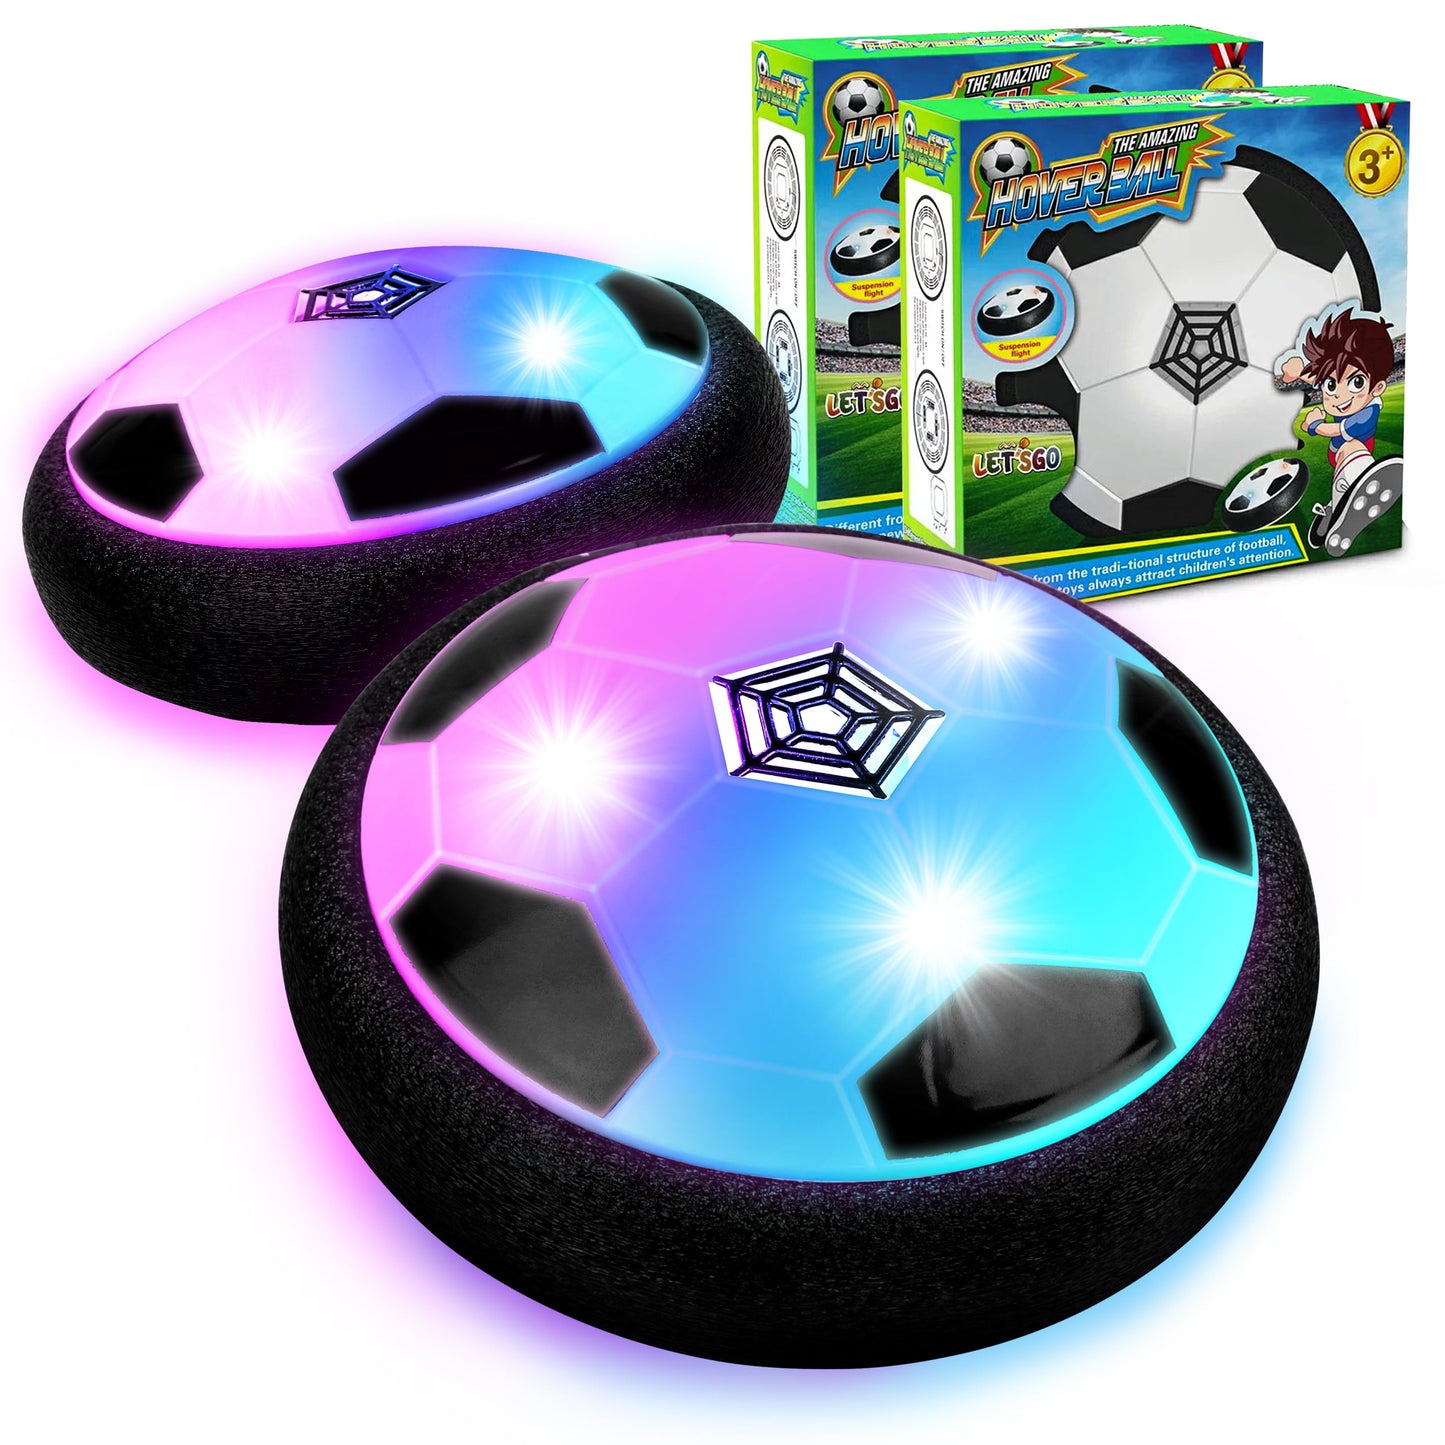 Hover Ball Toys for Boys & Girls - 2 LED Soccer Balls Indoor/Outdoor Games for Kids 3+ Year Old